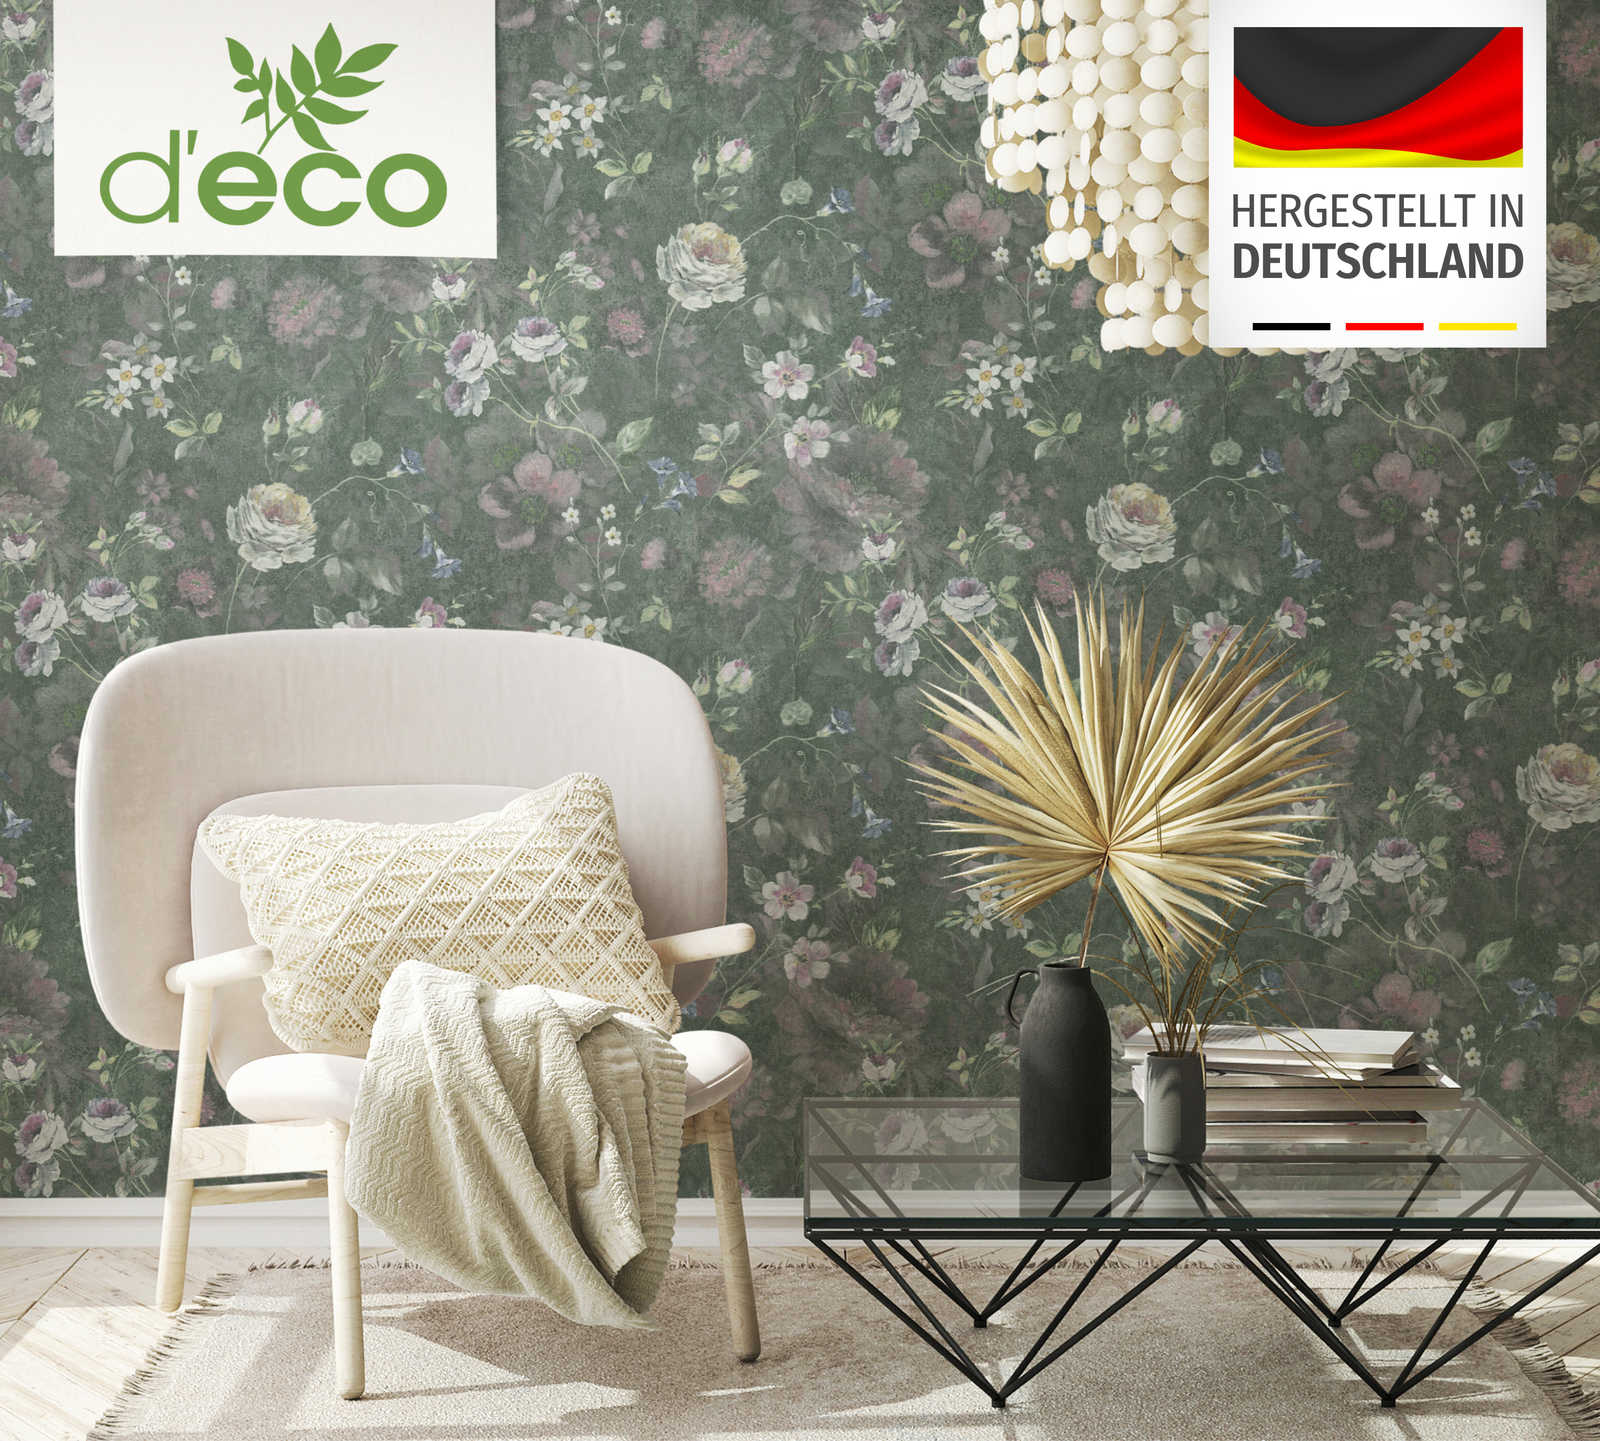             Non-woven wallpaper with painted floral pattern PVC-free - green, white, pink
        